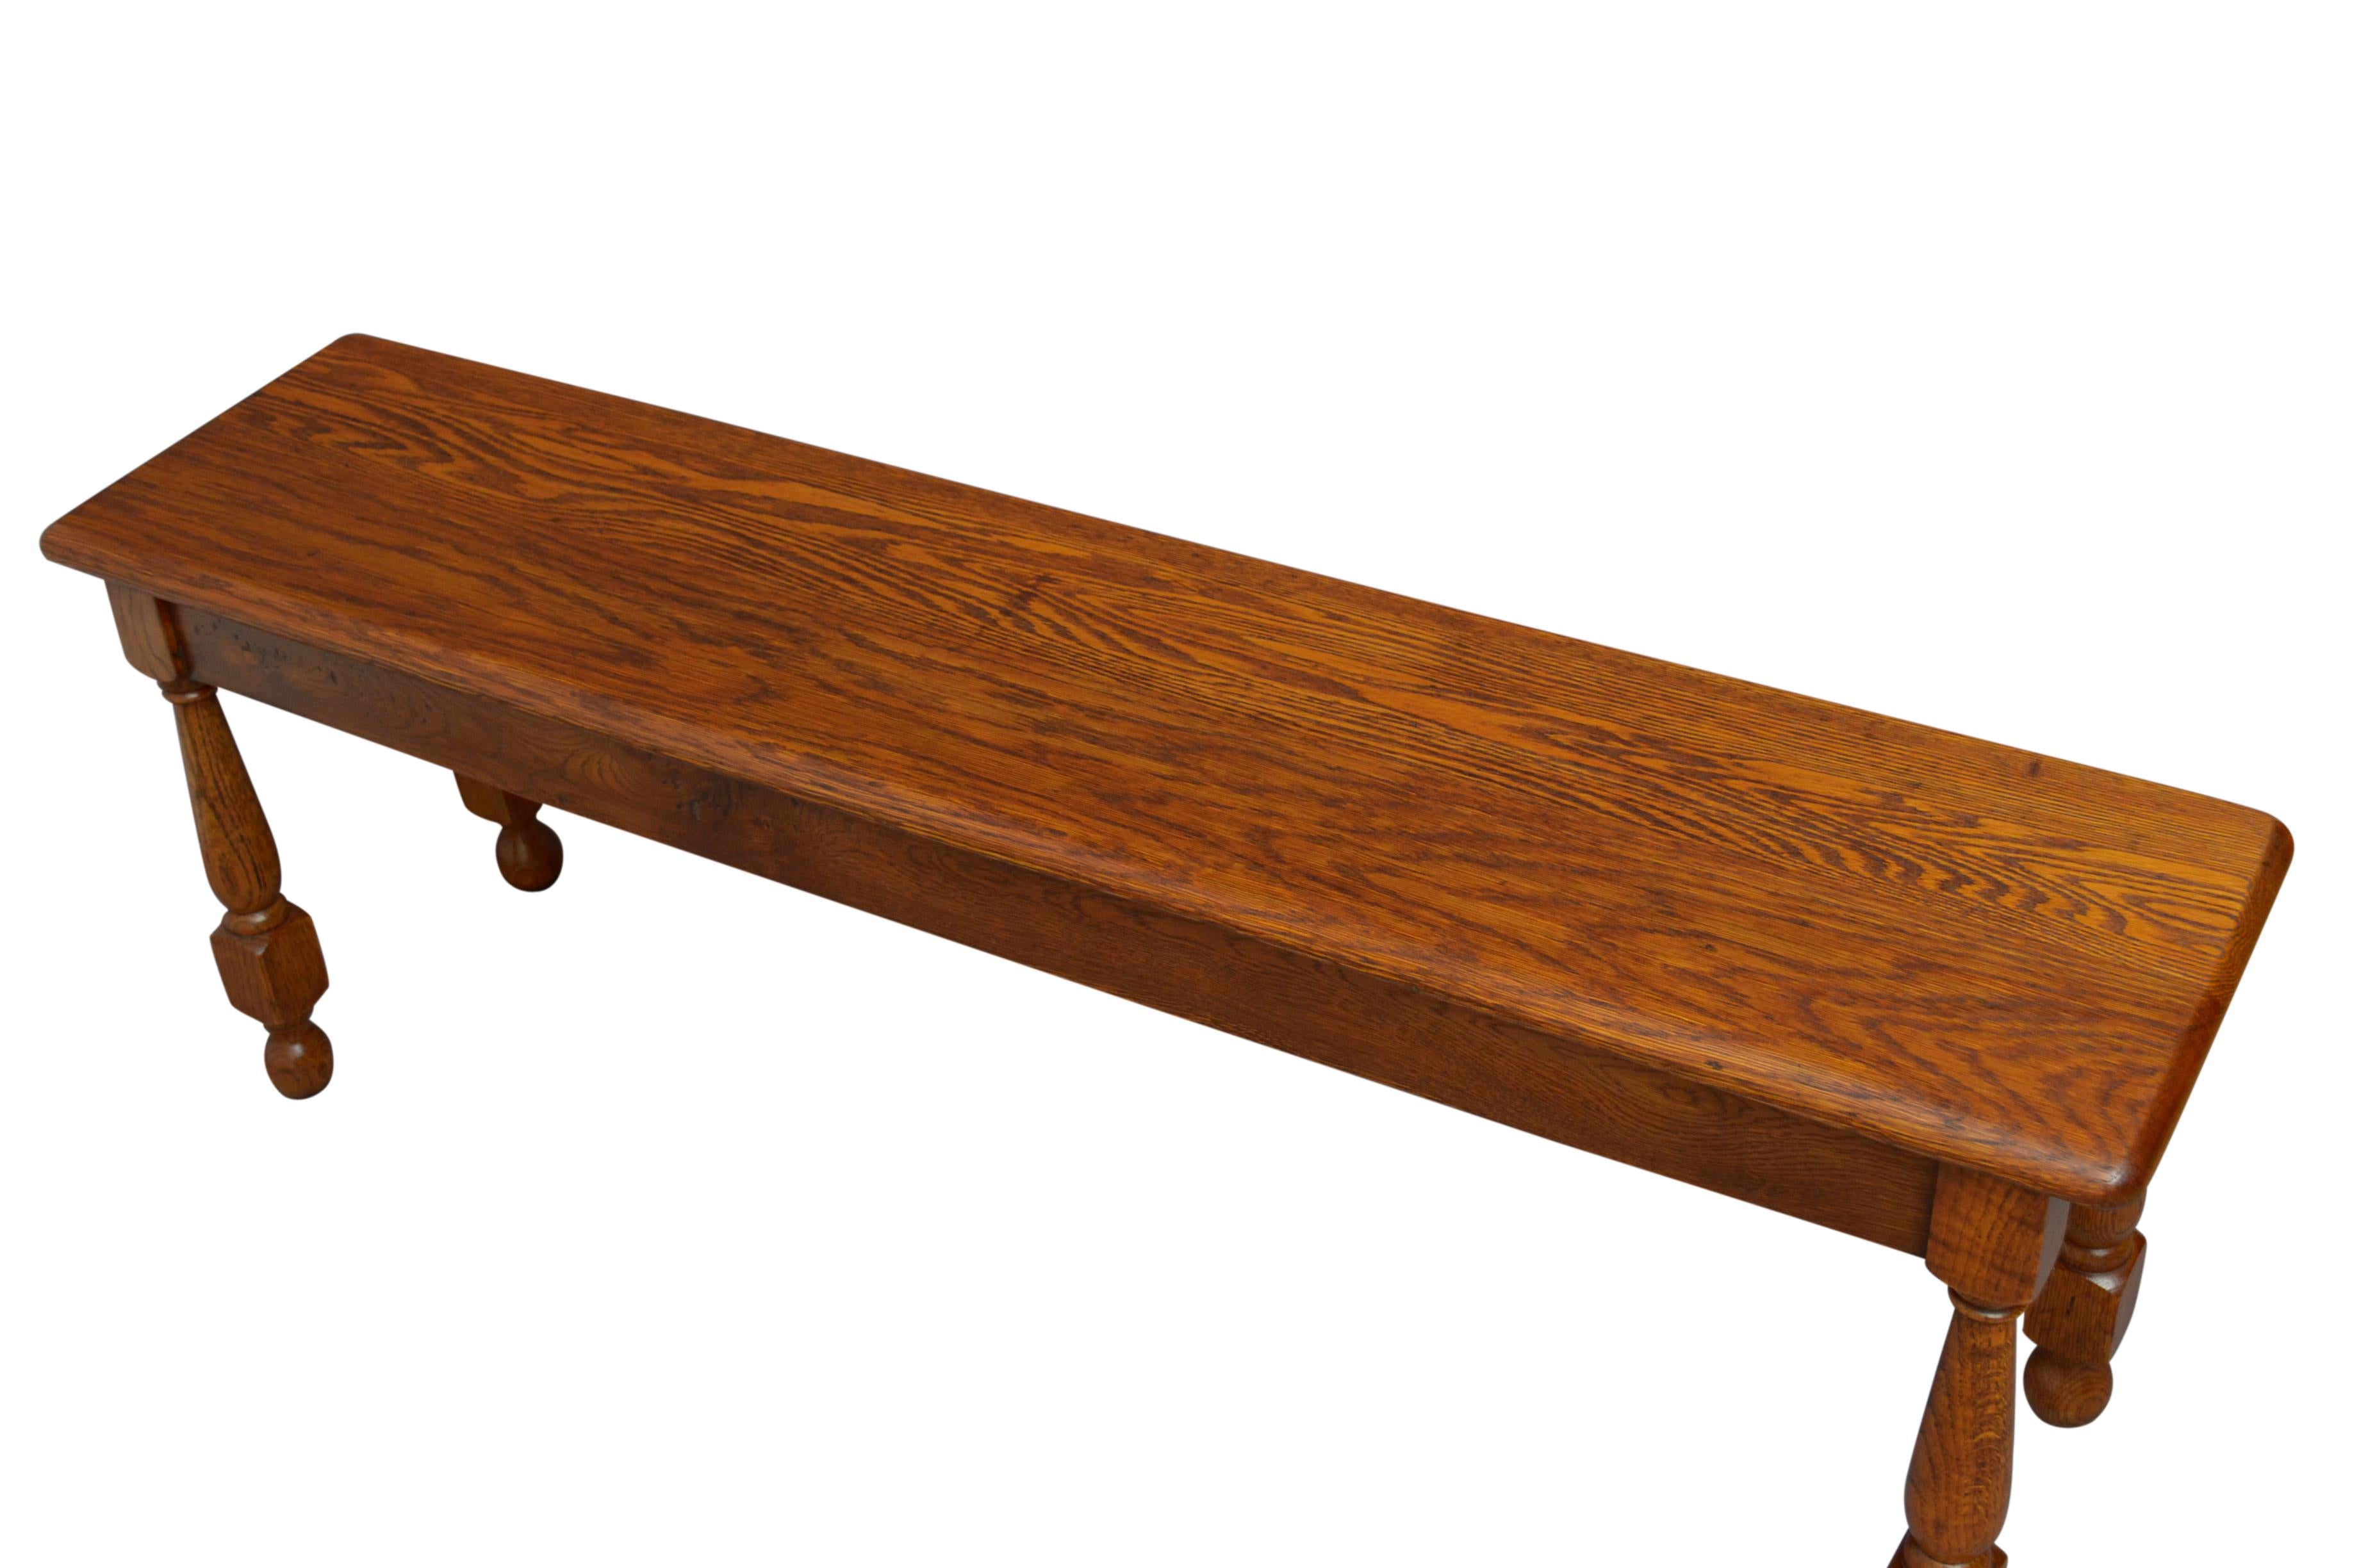 Simple solid oak hall seat with an attractive grain to the seat, standing on turned and tapered legs terminating in ball feet. This antique bench has been syamthetically restored and is in home ready condition. c1930.
Measures: H17